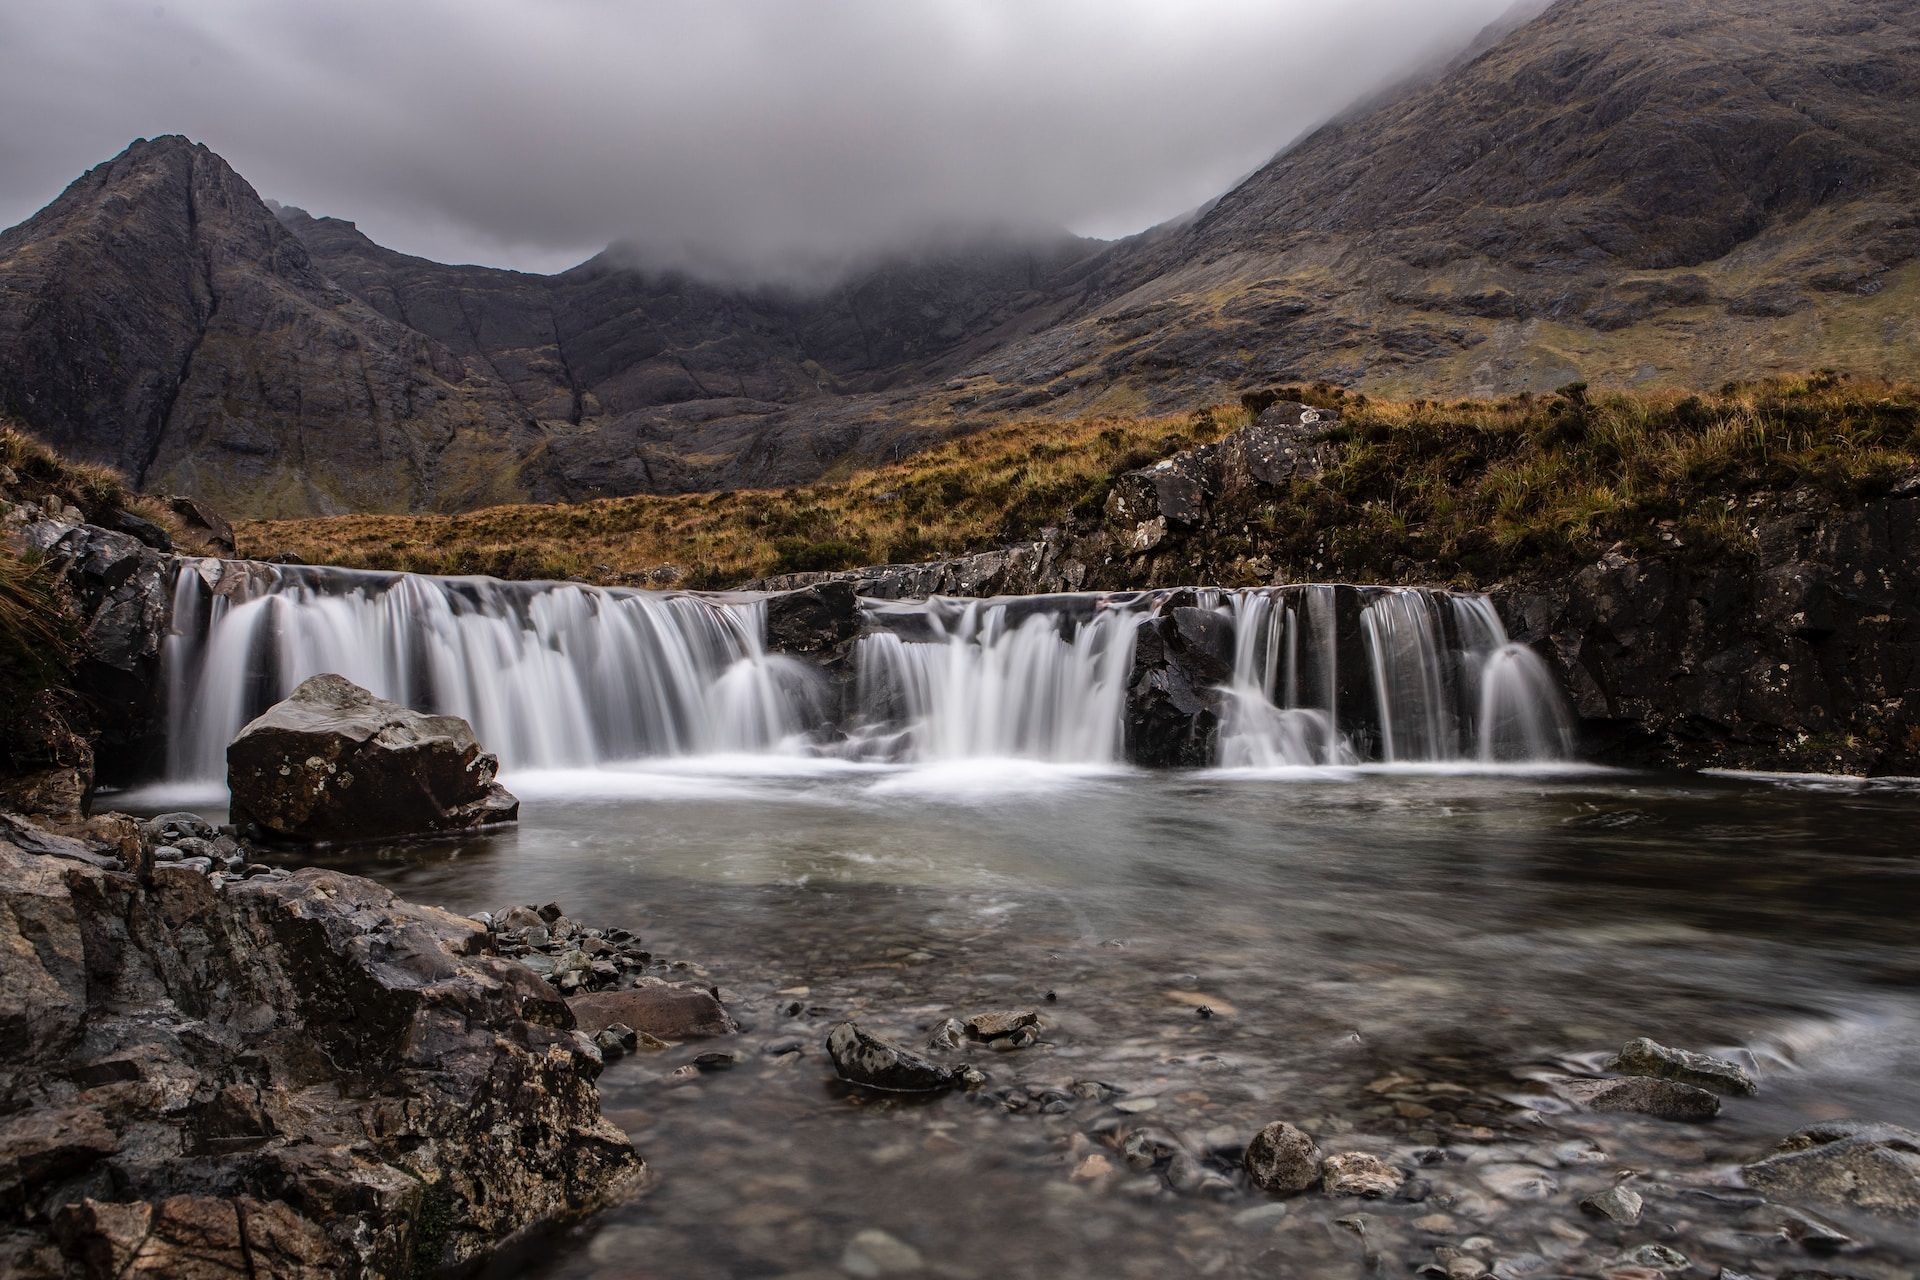 View of the Fairy Pools in the Isle of Skye under darks clouds, Scotland